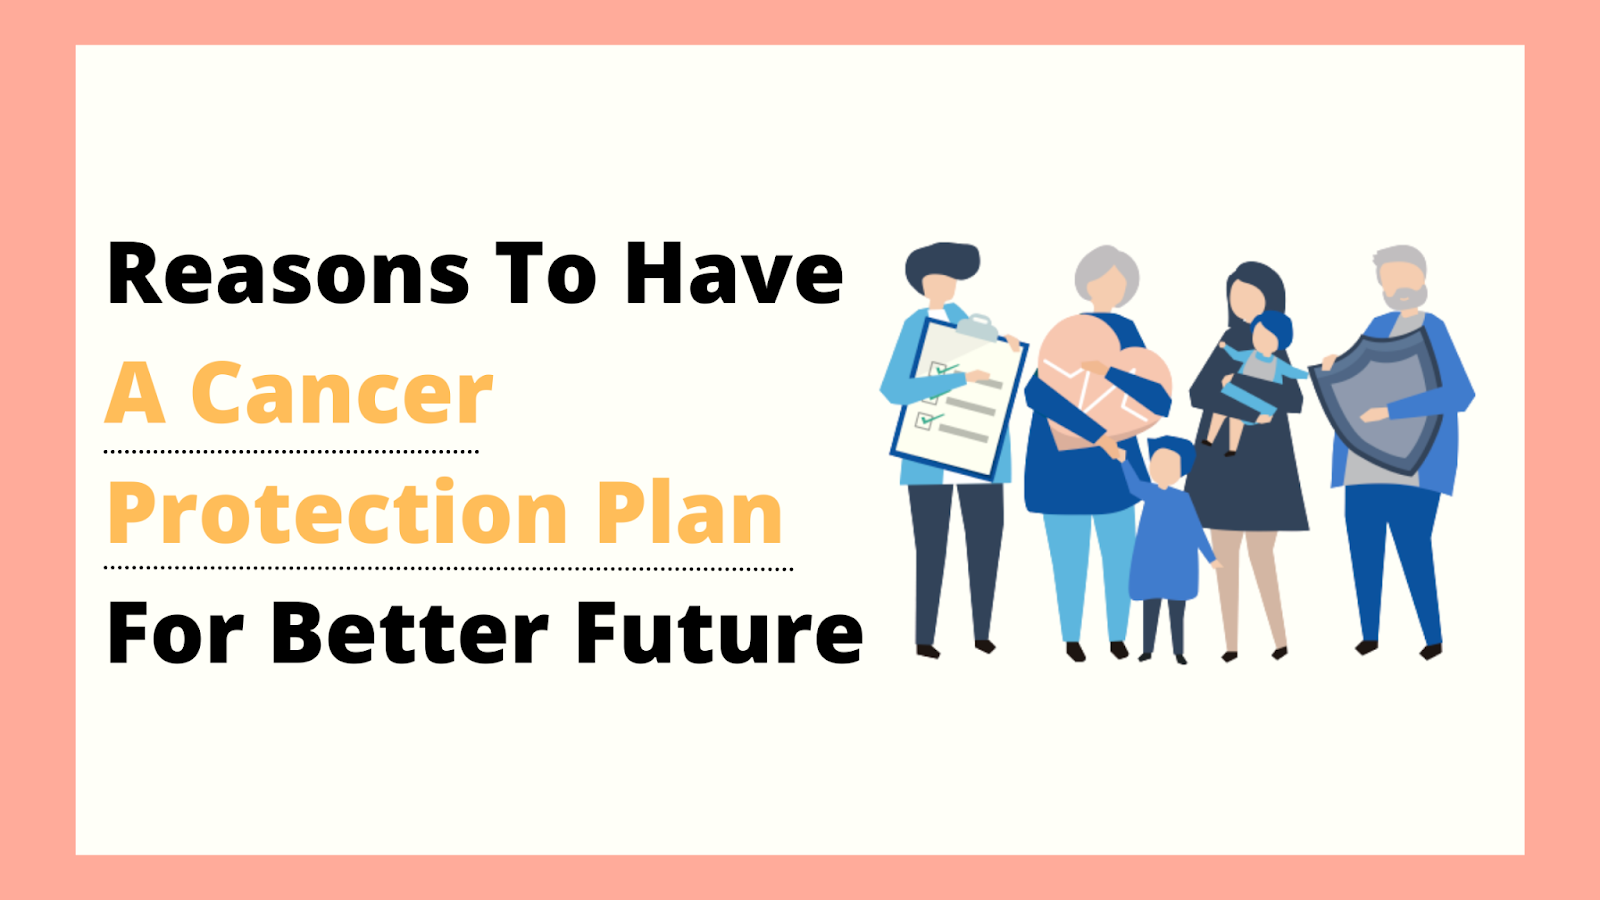 Cancer Protection Plan For Better Future